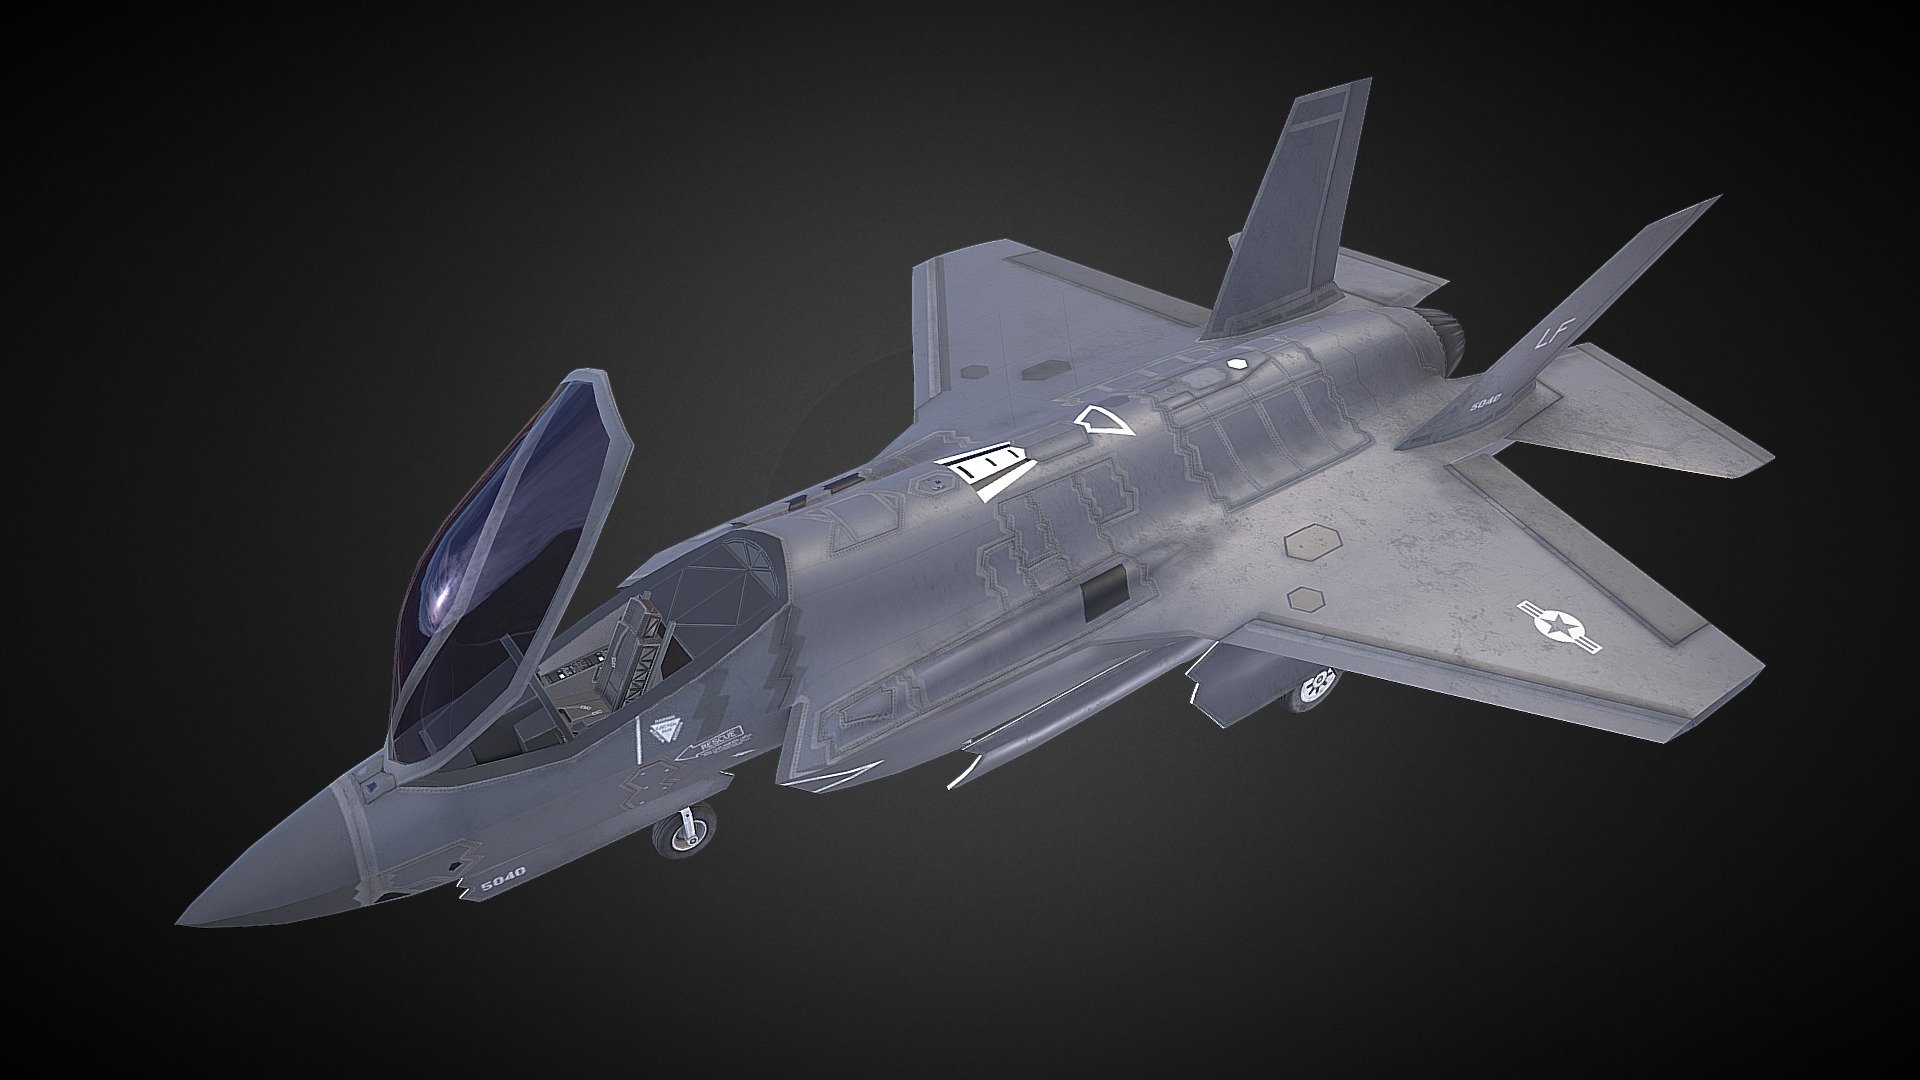 High Quality 3D model of F35A, accurate details

Can be used in games, simulations, visualizations

Low Poly model - 5855 polygons, 10476 triangles
All parts in 3d named

Textures:
Body 2048x2048 PNG
Interior 1024x1024 PNG

Alpha 1024x1024 PNG - F35 - Buy Royalty Free 3D model by Carbuni 3d model